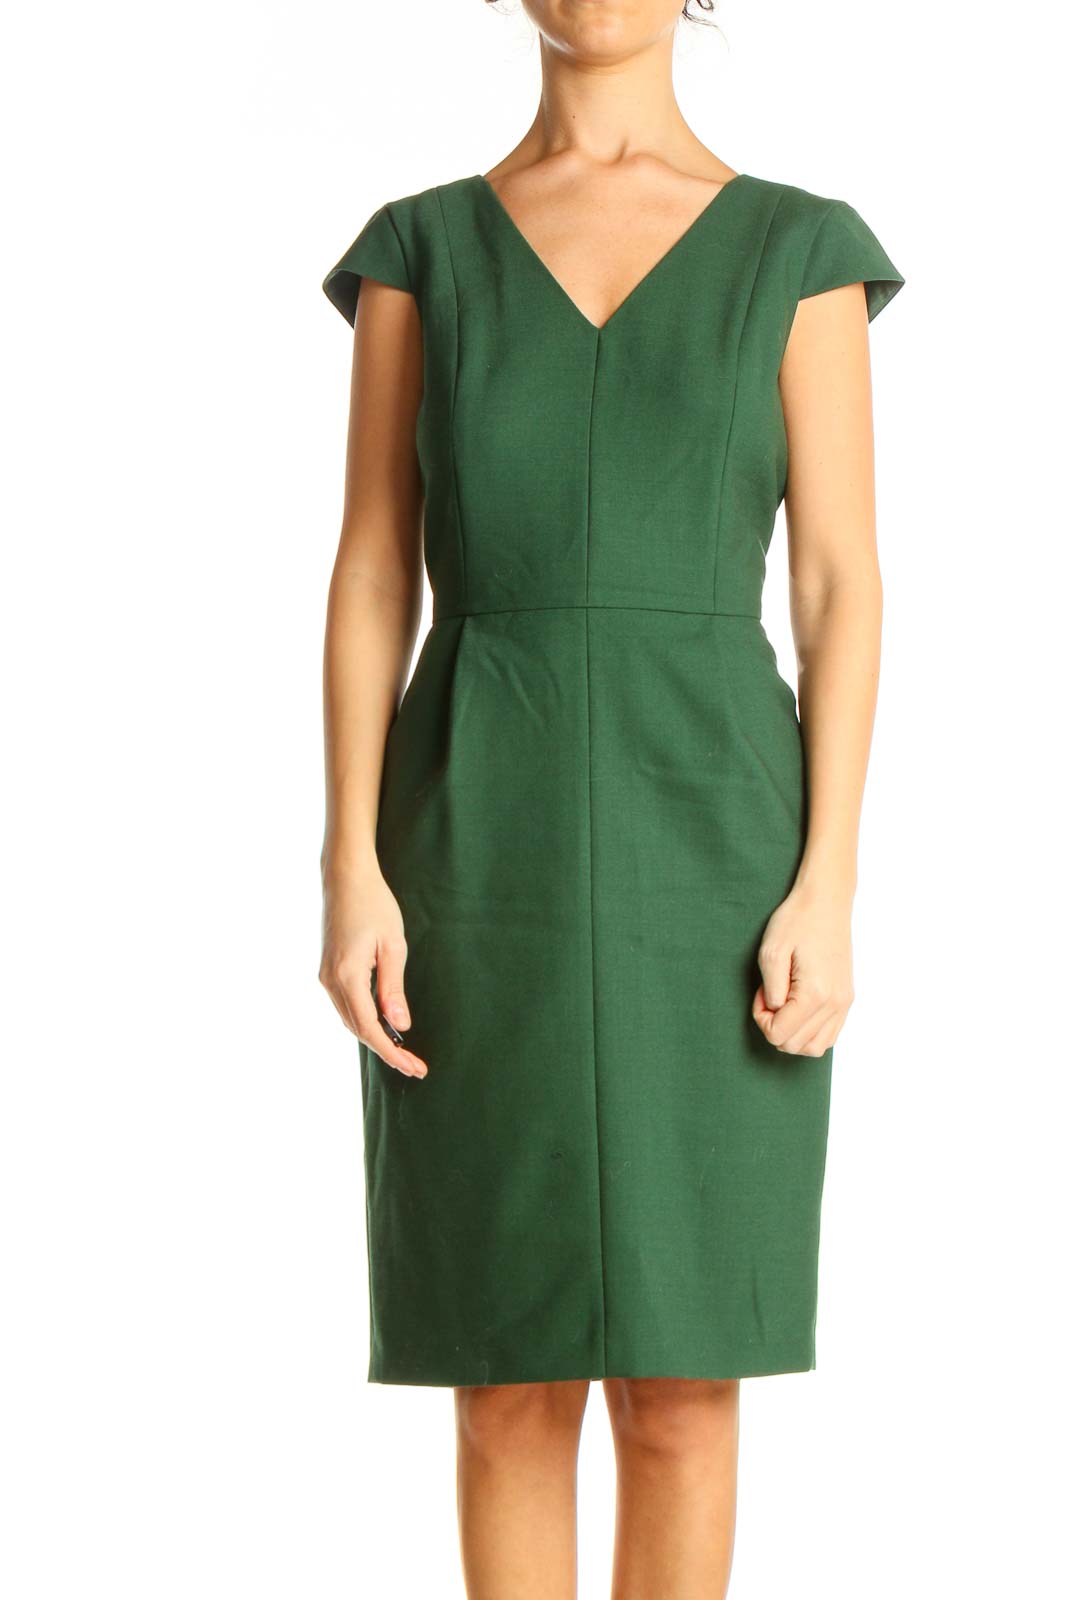 Green Solid Work Sheath Dress Front